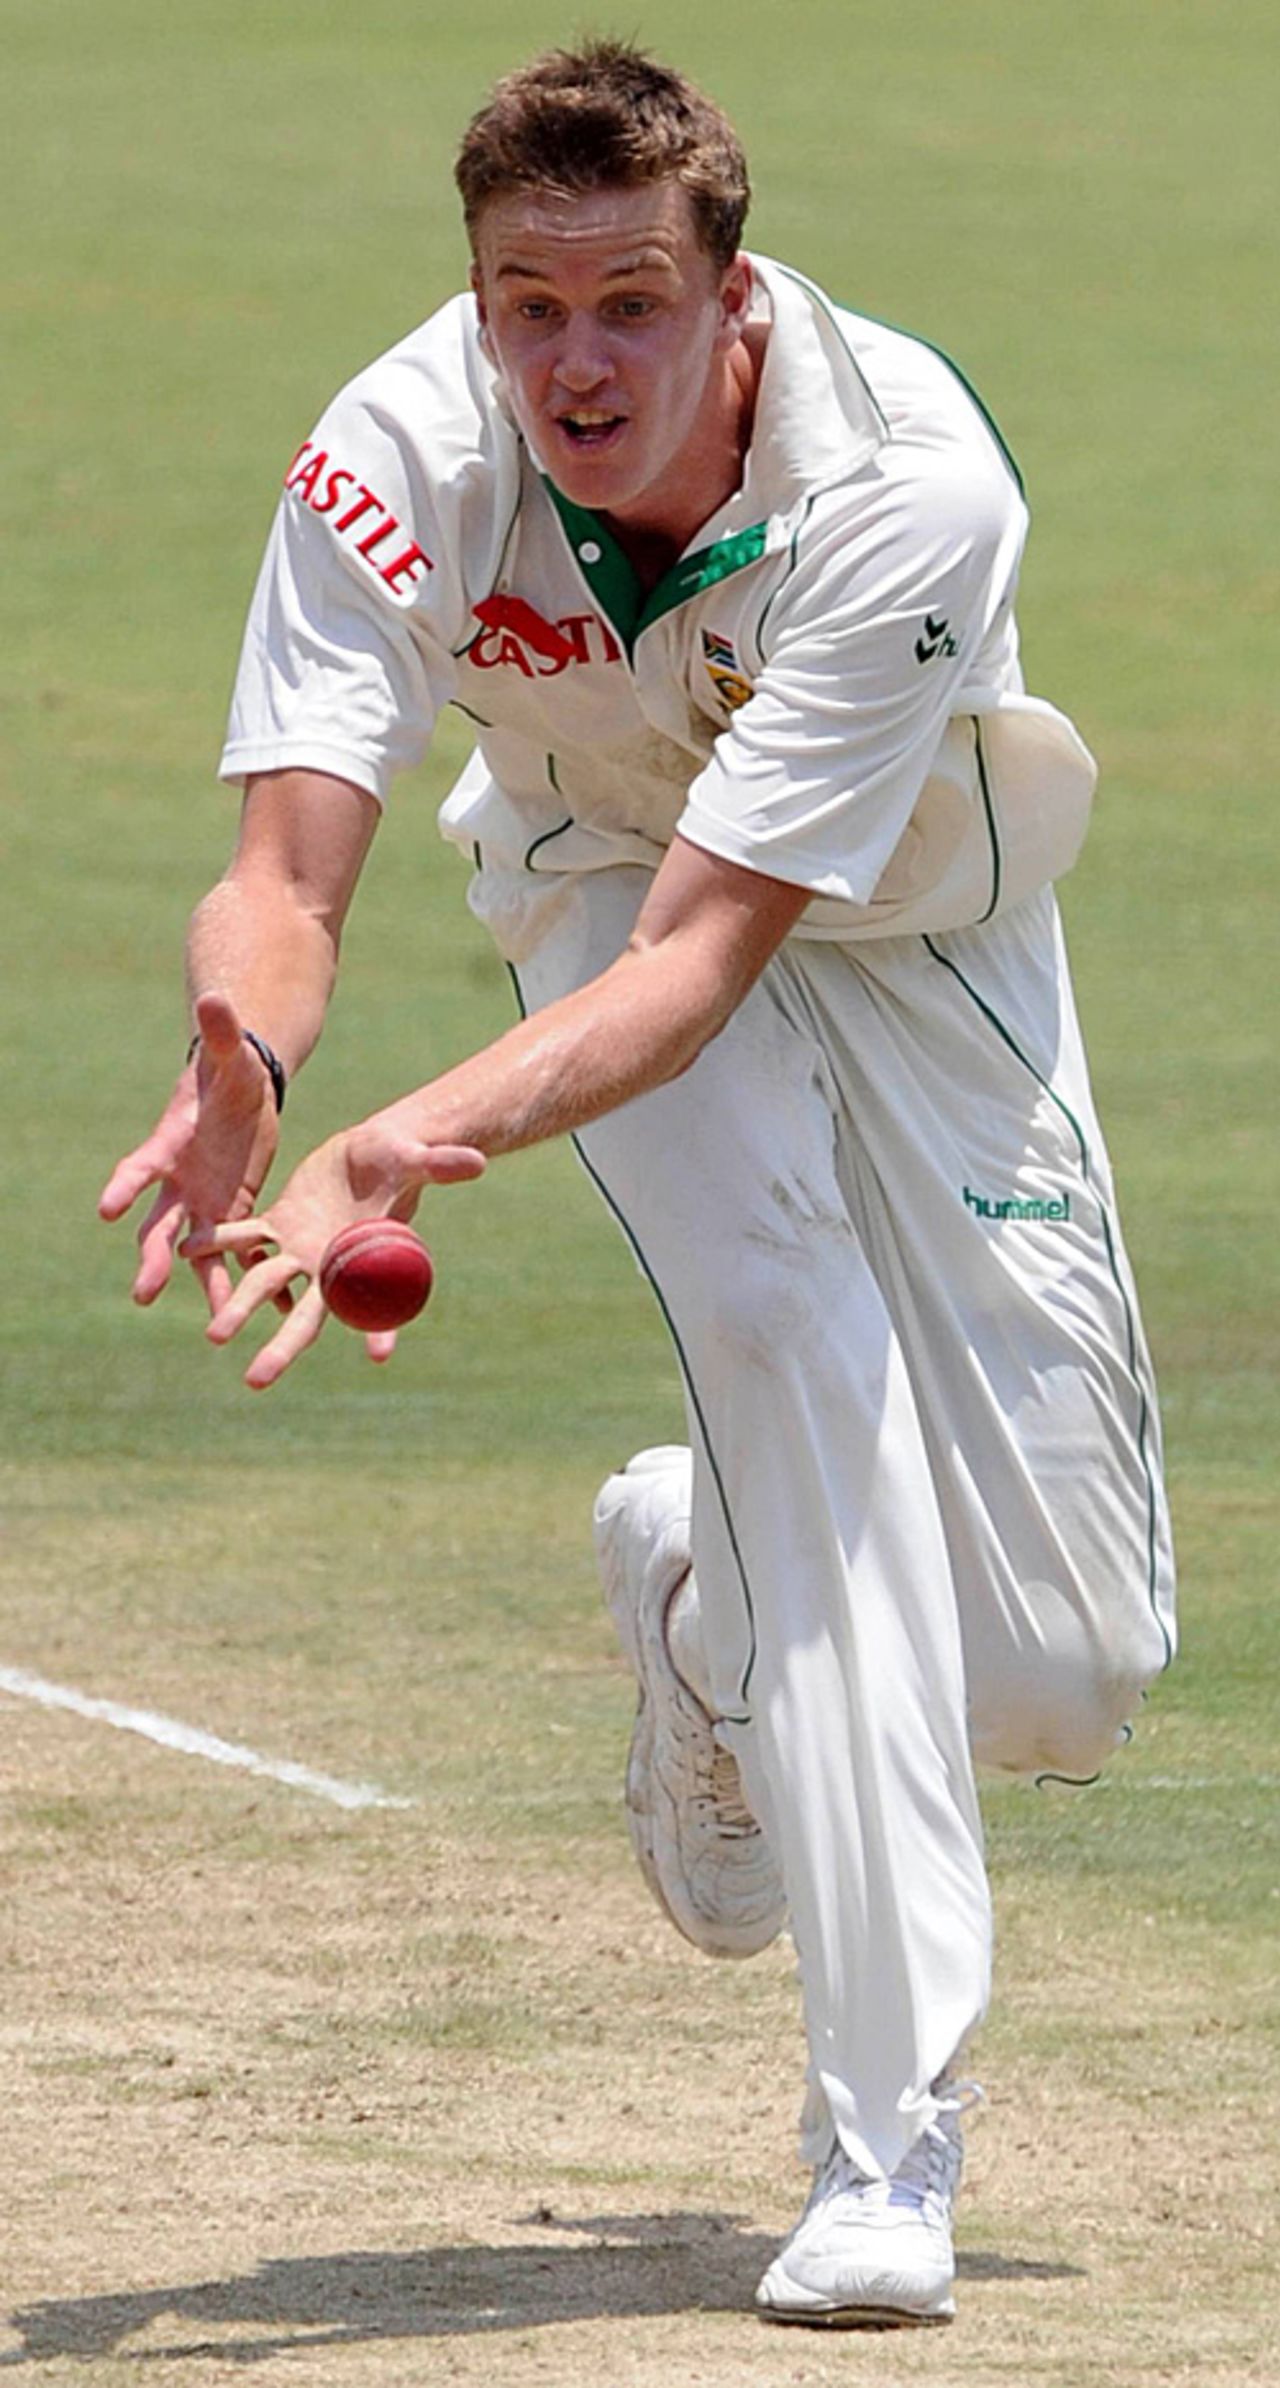 Morne Morkel scoops to receive a caught-and-bowled from Mohammad Ashraful, South Africa v Bangladesh, 2nd Test, Centurion, 1st day, November 26, 2008